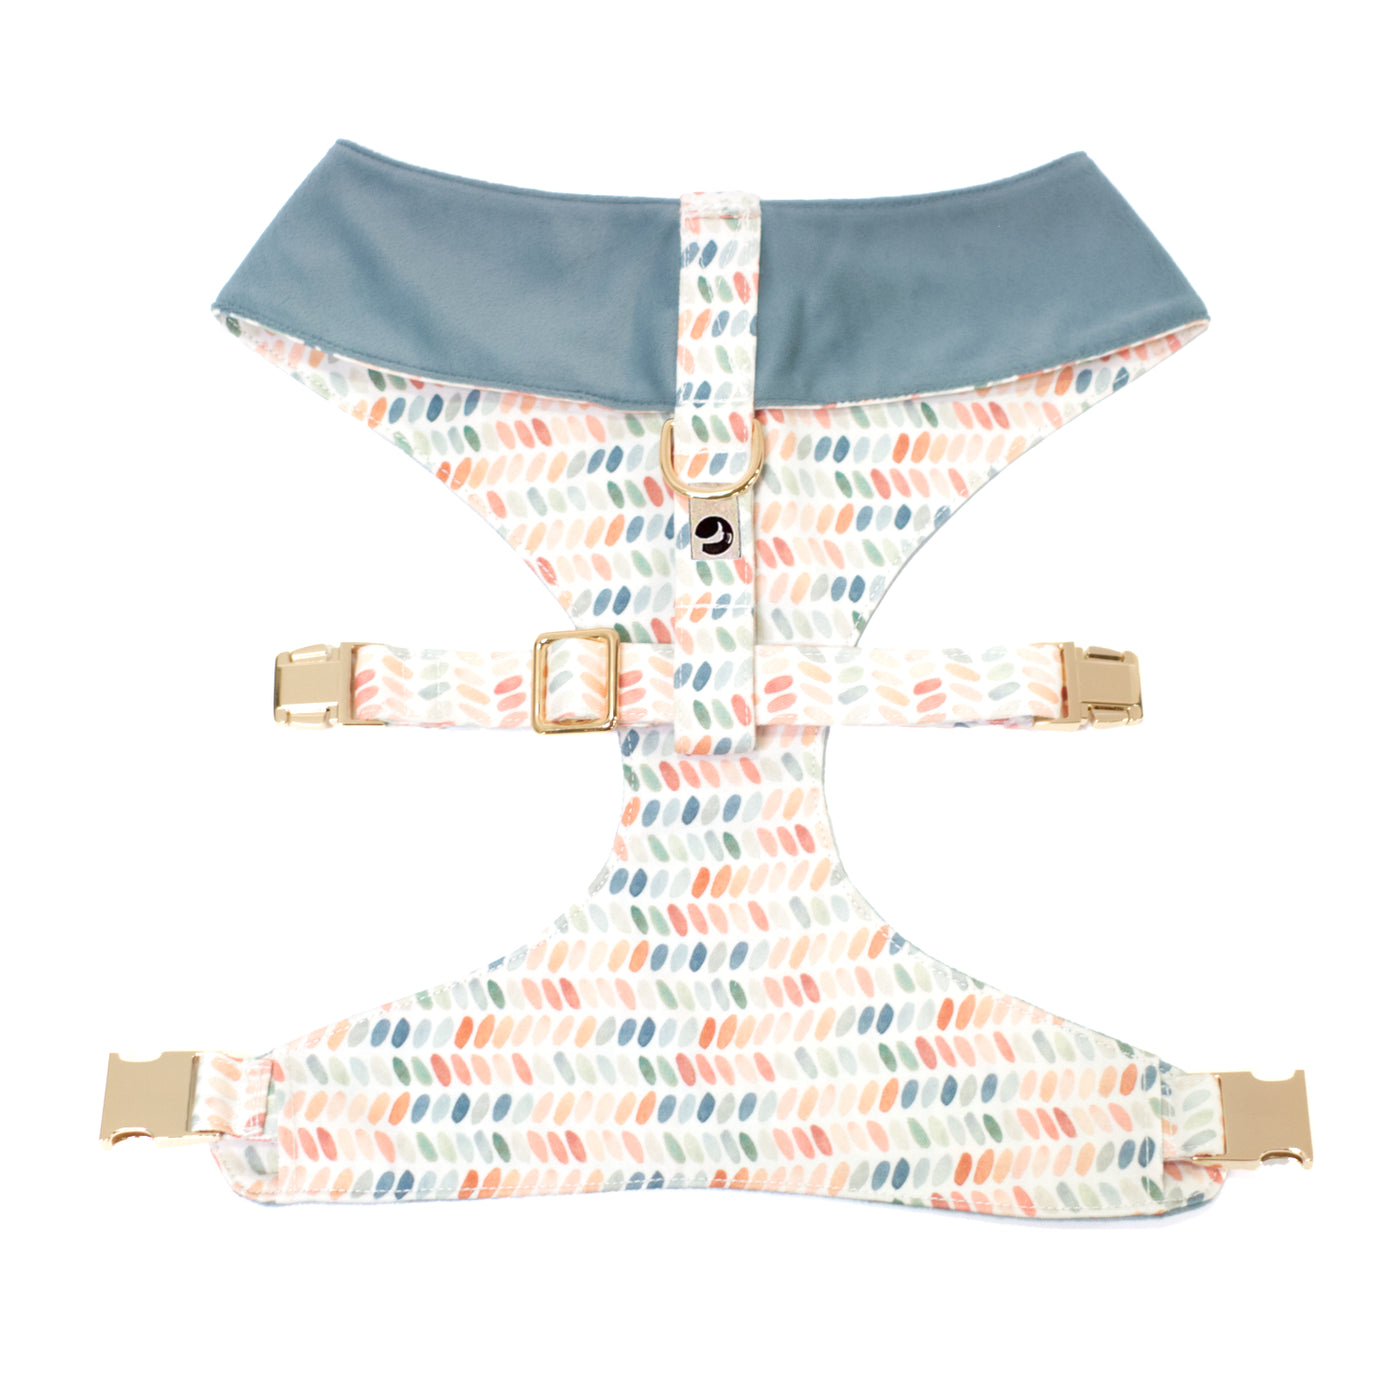 Reversible dog harness in dusty blue velvet and multi-color polka dot print show from top/back.